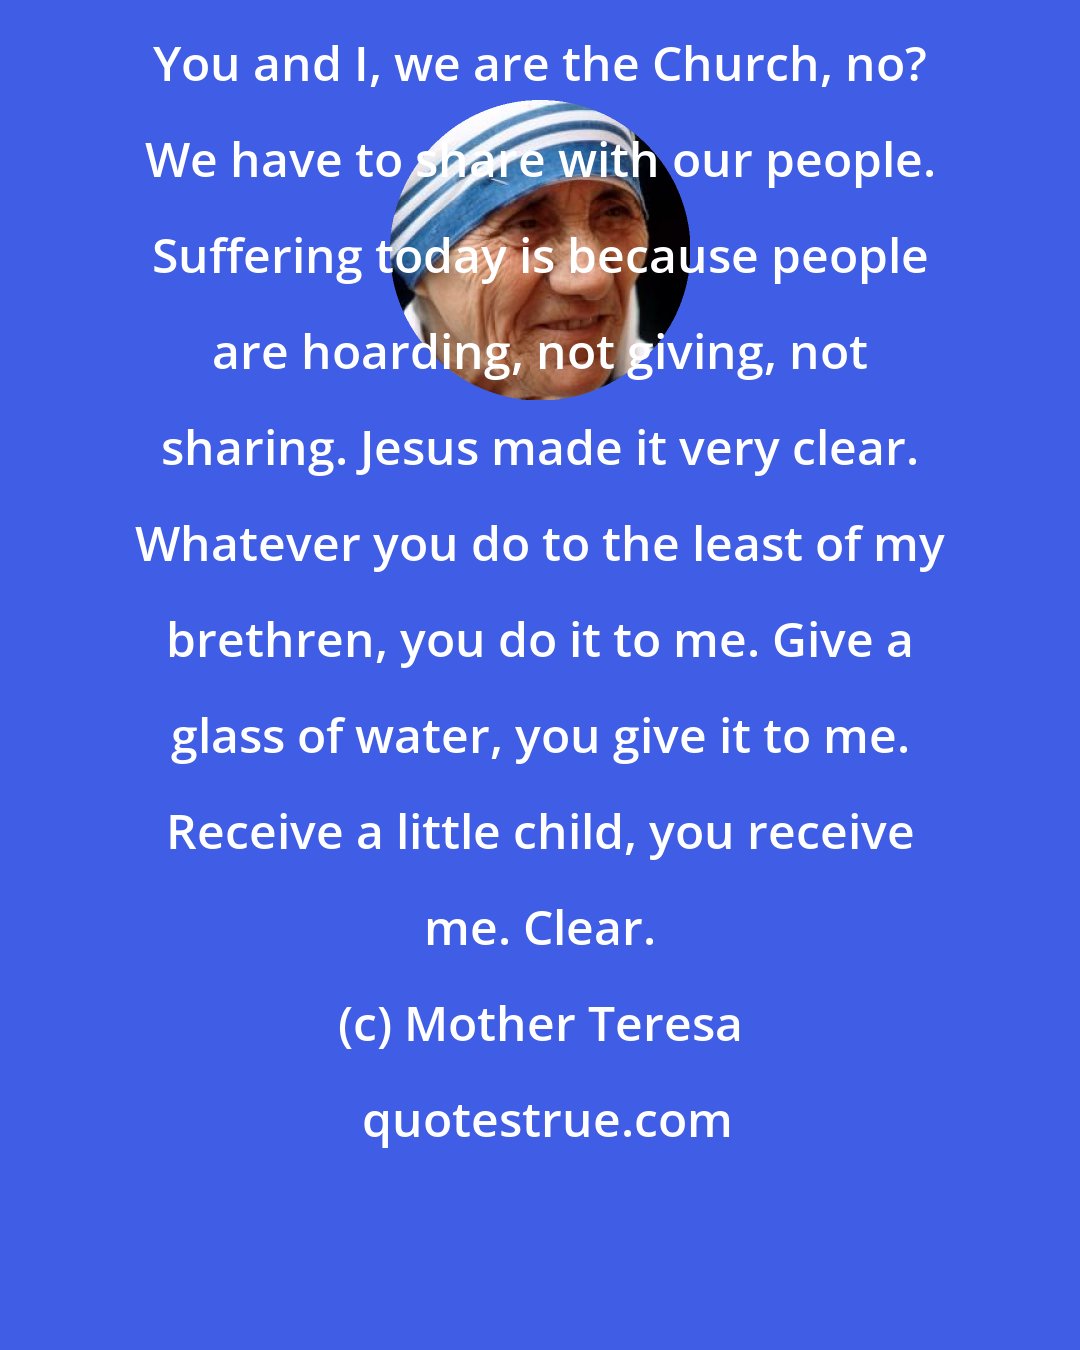 Mother Teresa: You and I, we are the Church, no? We have to share with our people. Suffering today is because people are hoarding, not giving, not sharing. Jesus made it very clear. Whatever you do to the least of my brethren, you do it to me. Give a glass of water, you give it to me. Receive a little child, you receive me. Clear.